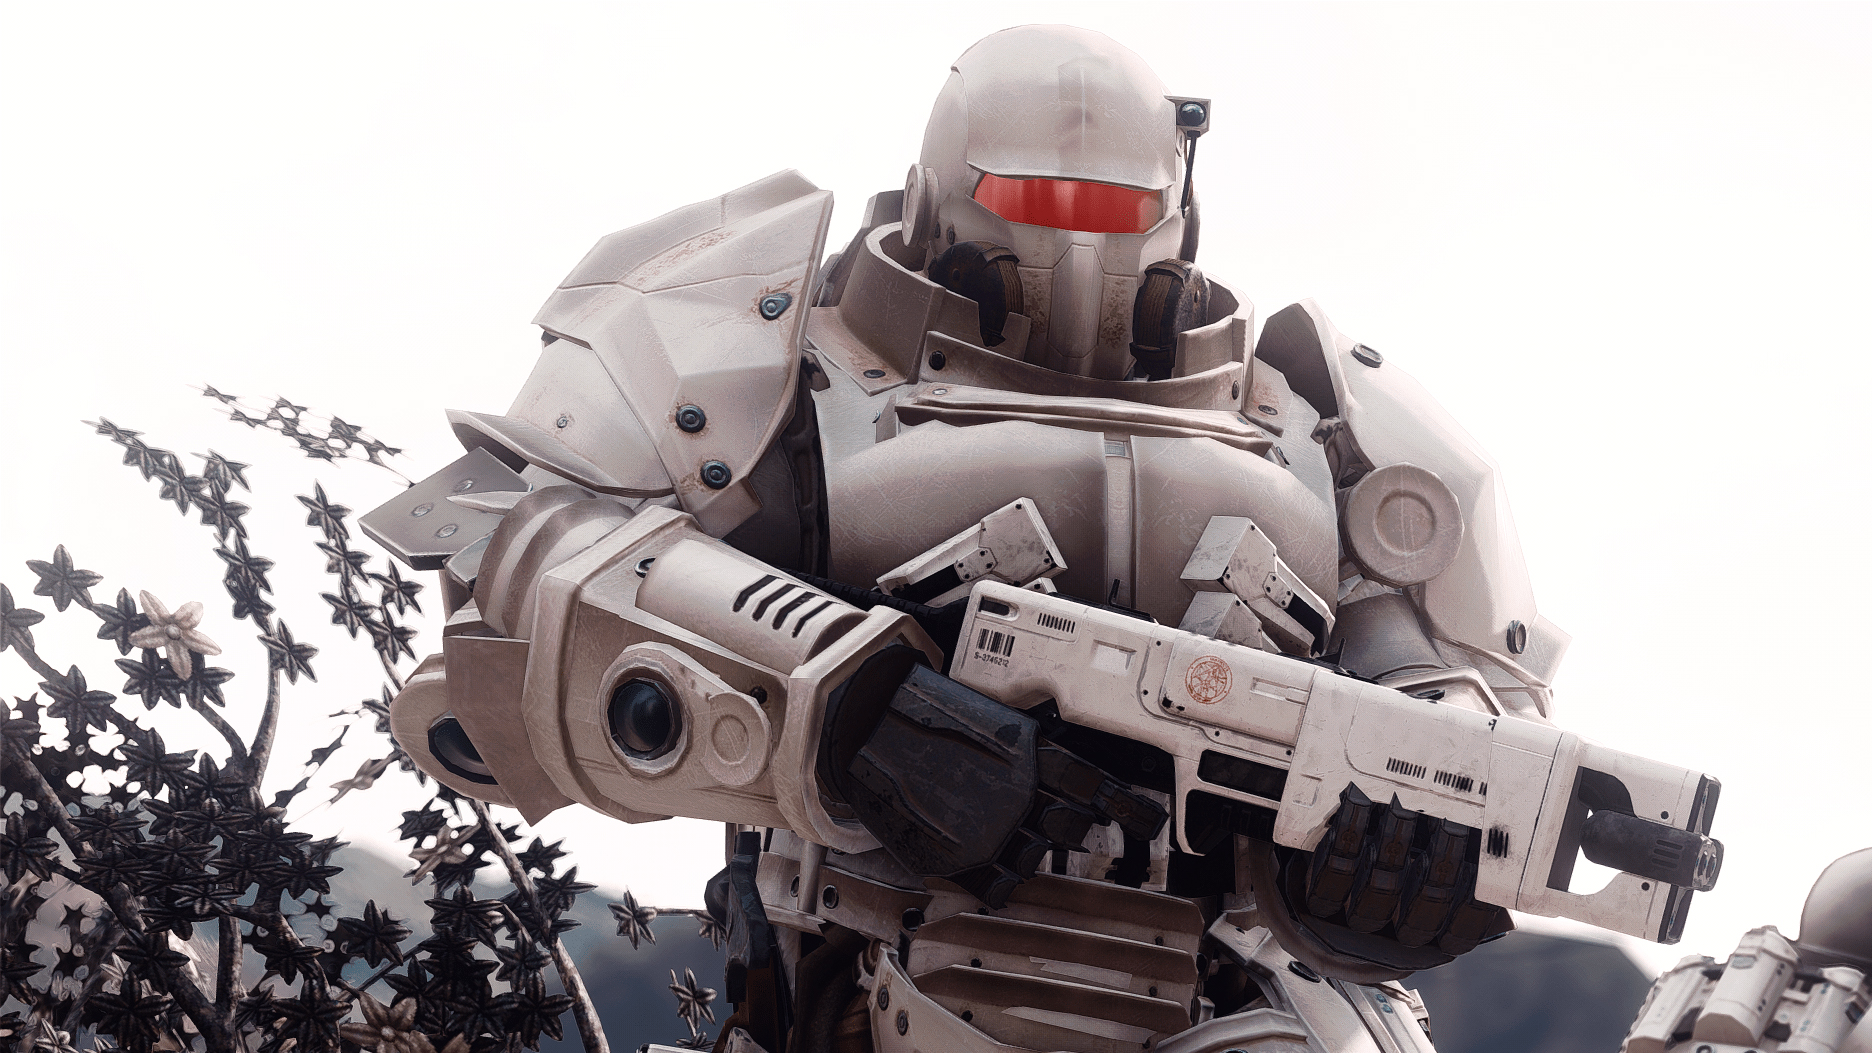  This Fallout 4 synth power armor mod looks so sick it makes me want to join the Institute 